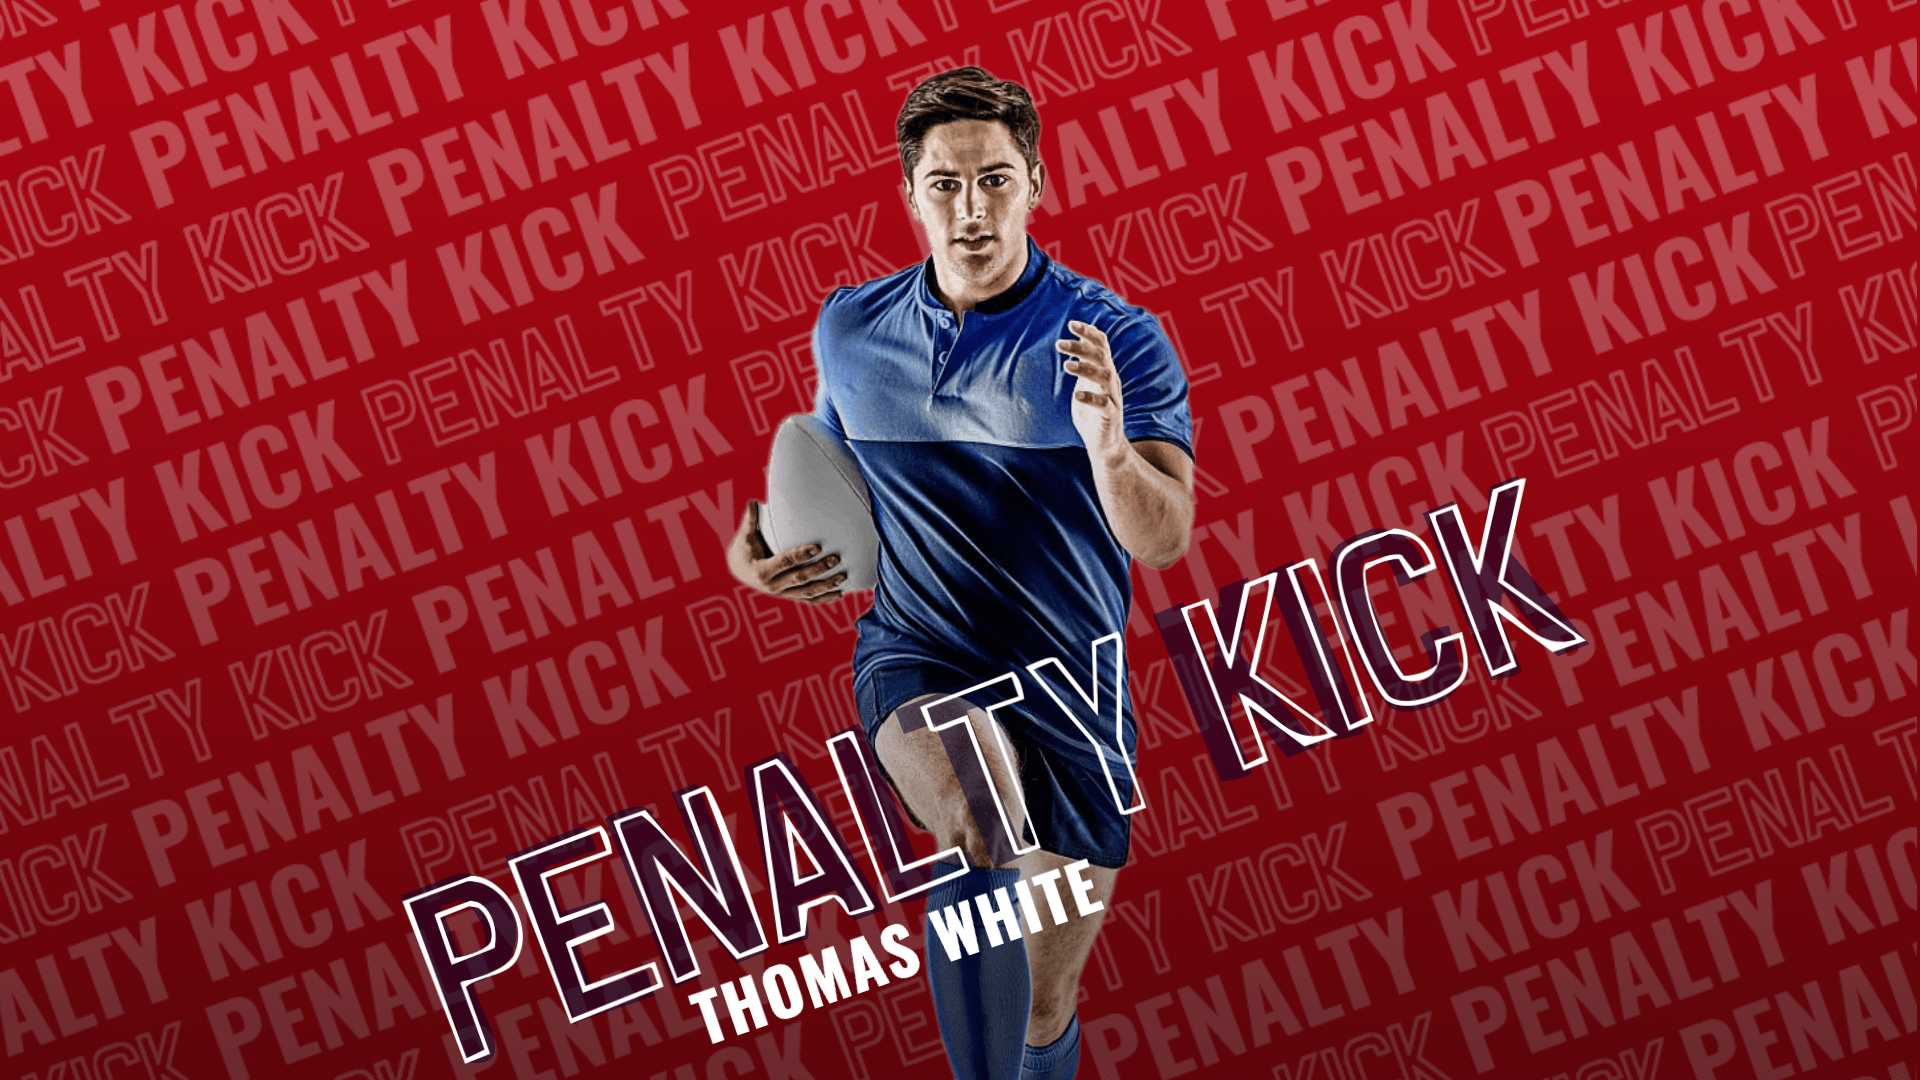 Rugby Penalty Kick Template